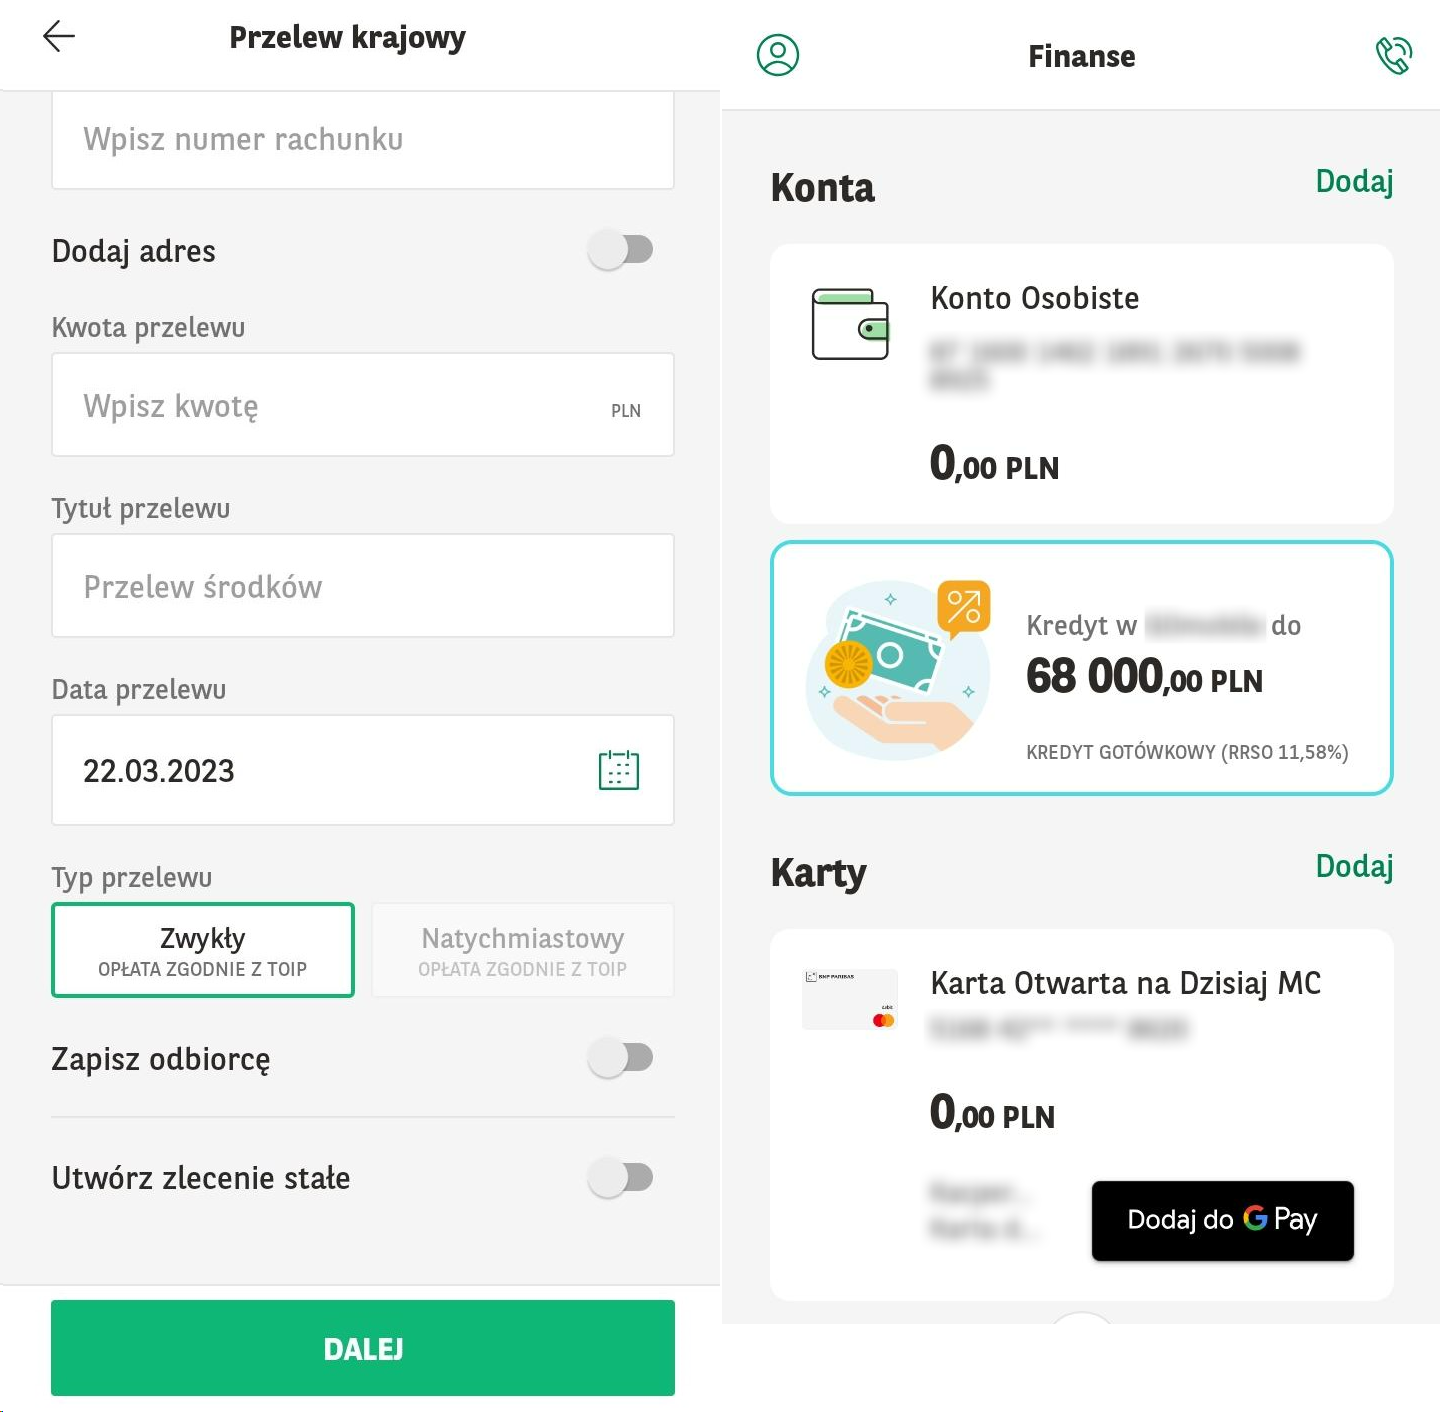 Two screenshots of the mobile banking app side by side. The image on the left is part of the form to make a transfer, and the screenshot on the right shows the Finance screen with blurred account and card.